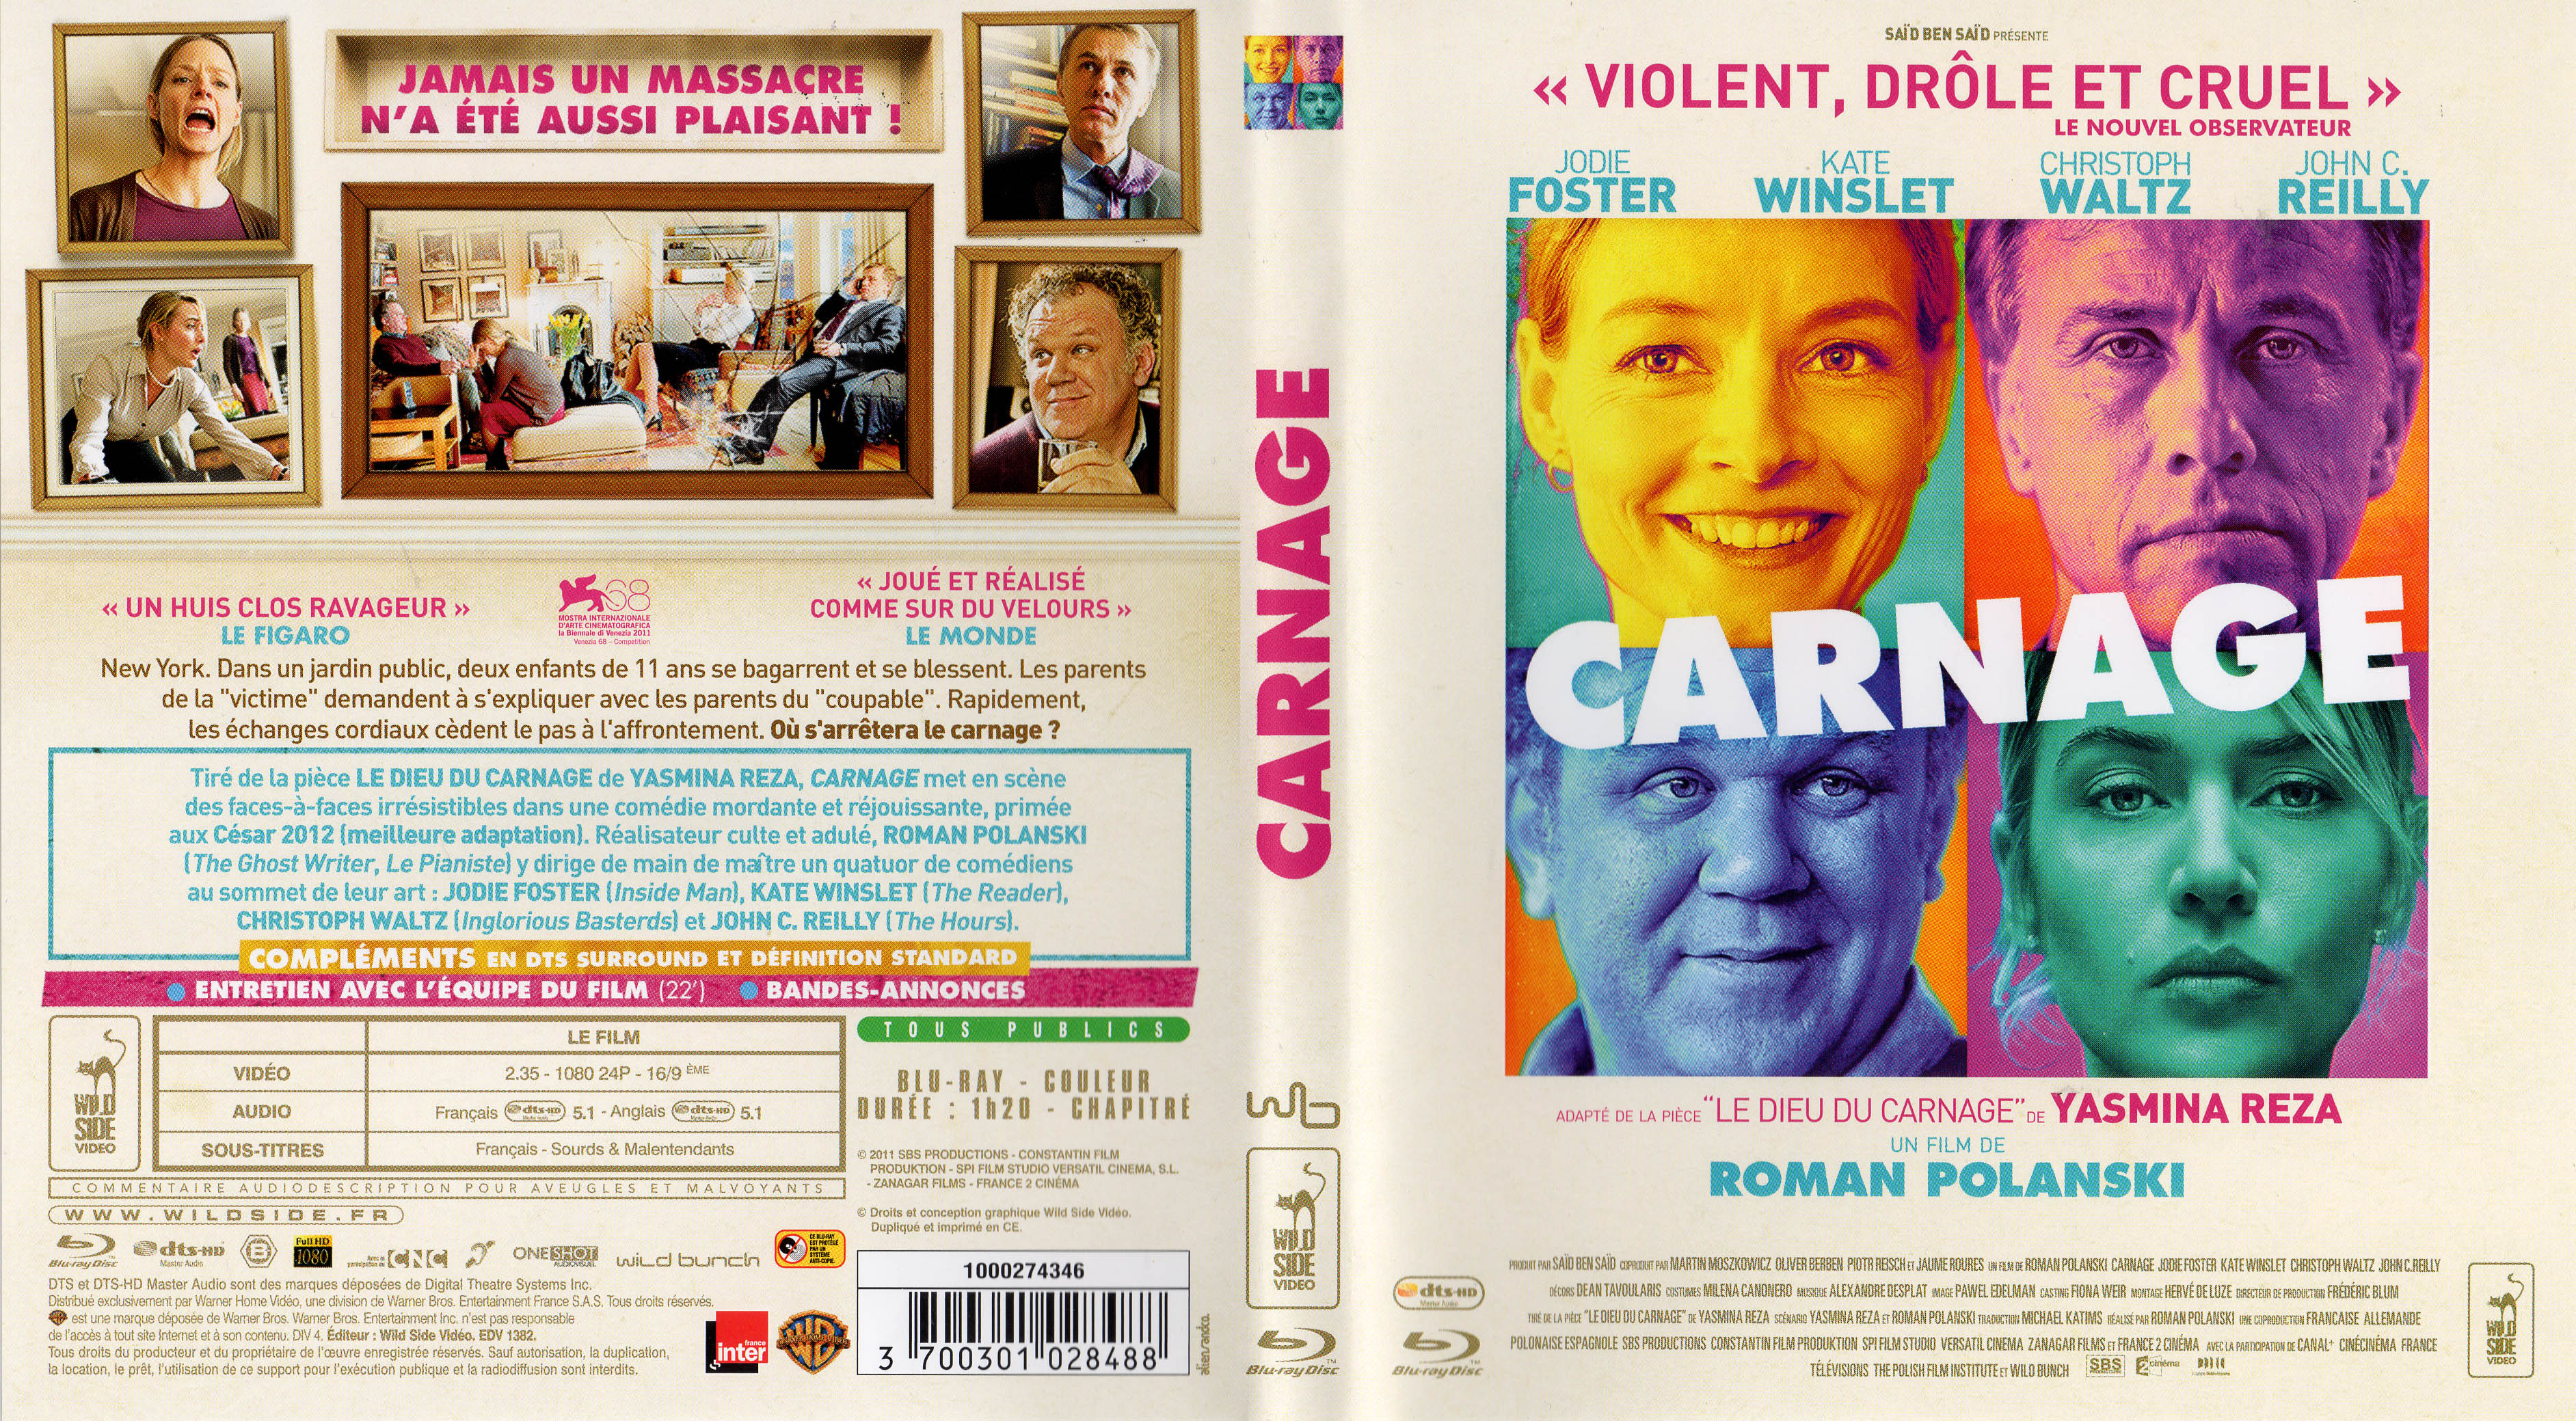 Jaquette DVD Carnage (2011) (BLU-RAY)